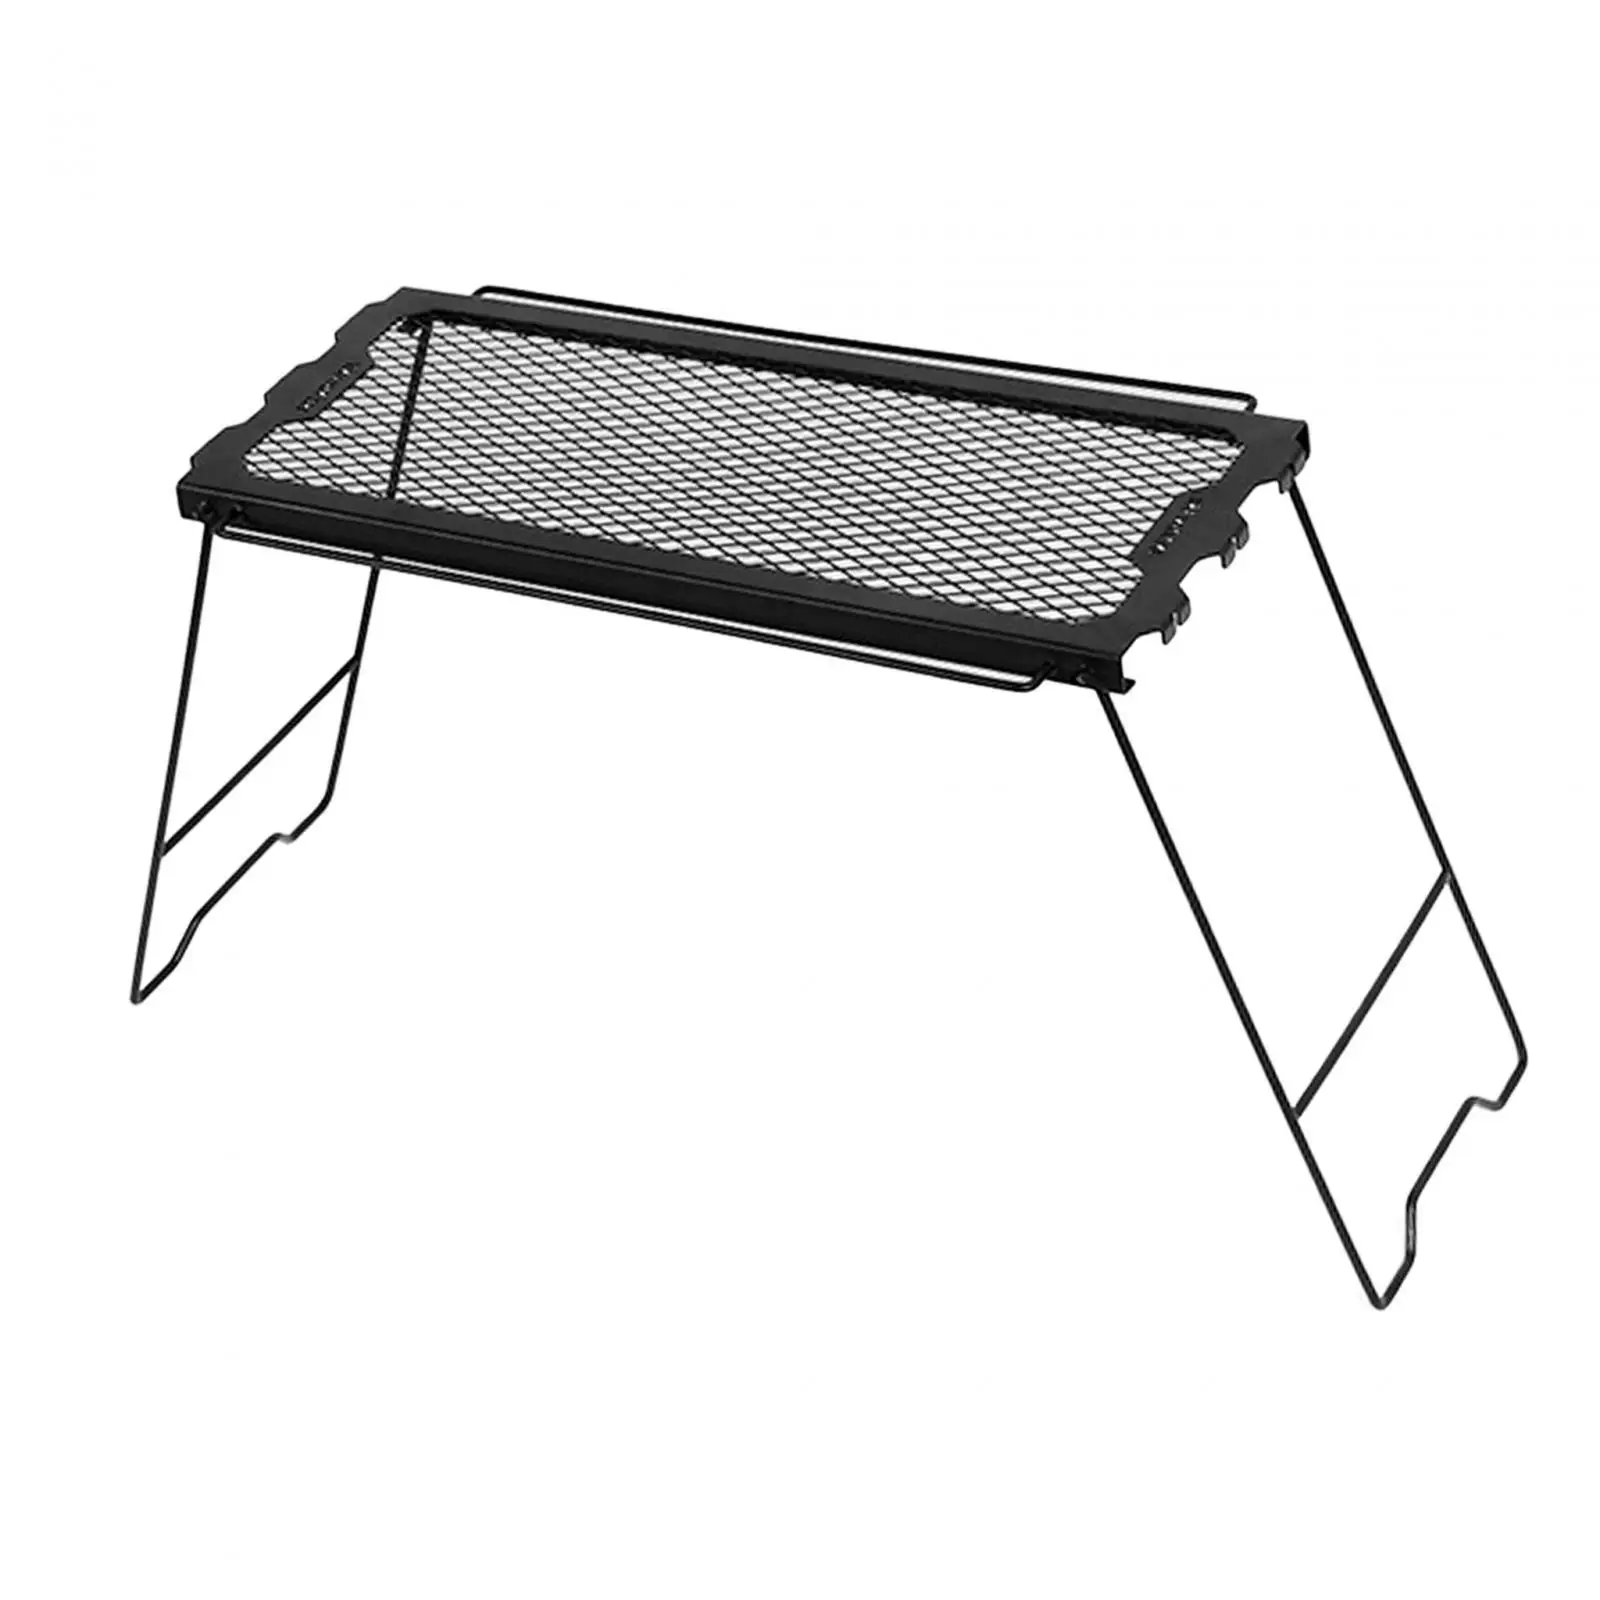 Folding Camping Table Camping Cooking Grate over Fire Foldable Outdoor Picnic Foldable Campfire Grill for Indoor BBQ RV Patio